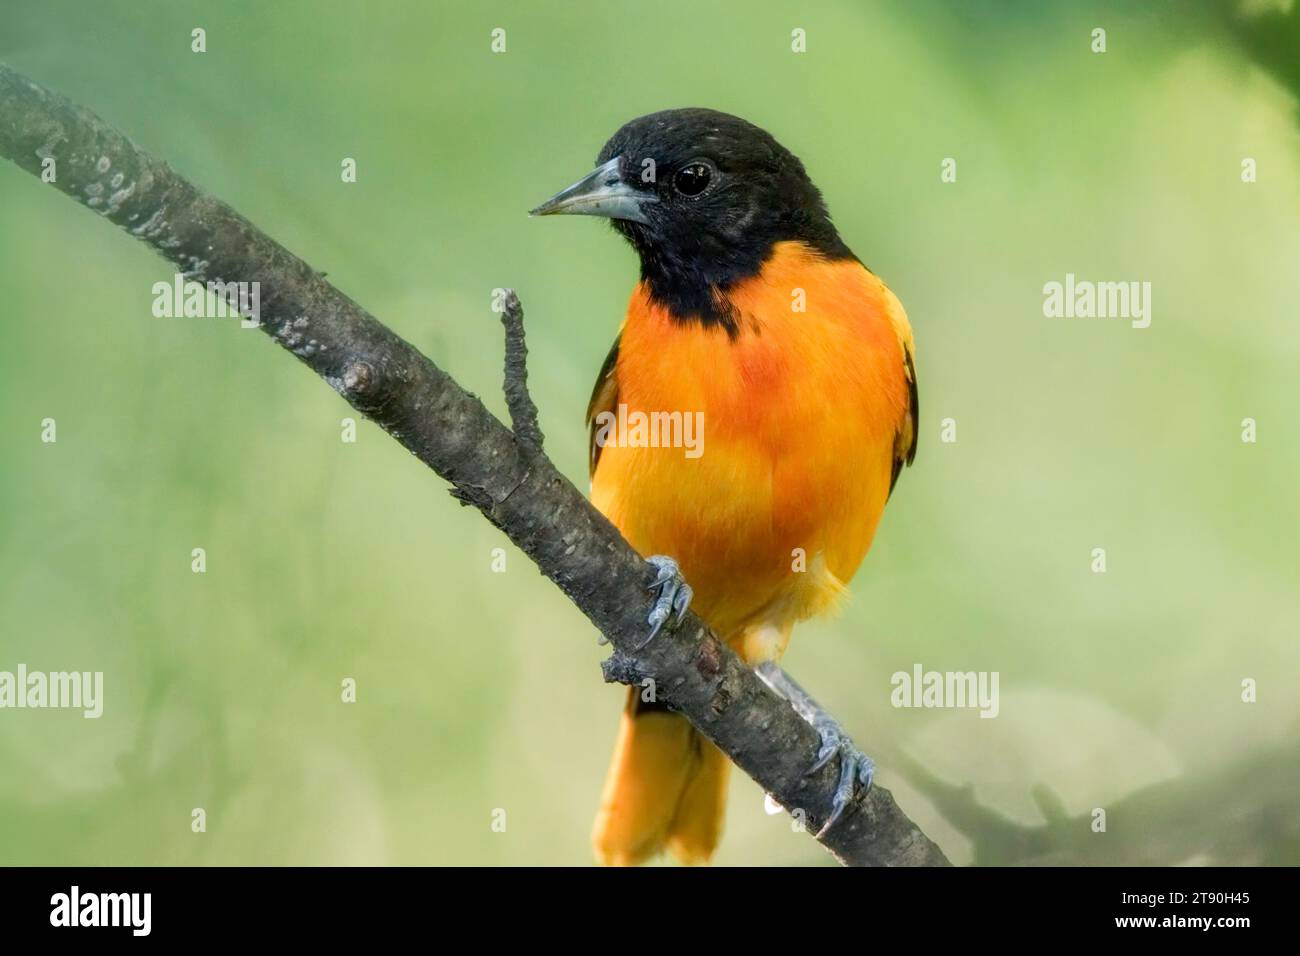 Close up Male Baltimore Oriole (Icterus galbula) perched on tree branch in the Chippewa National Forest, northern Minnesota USA Stock Photo